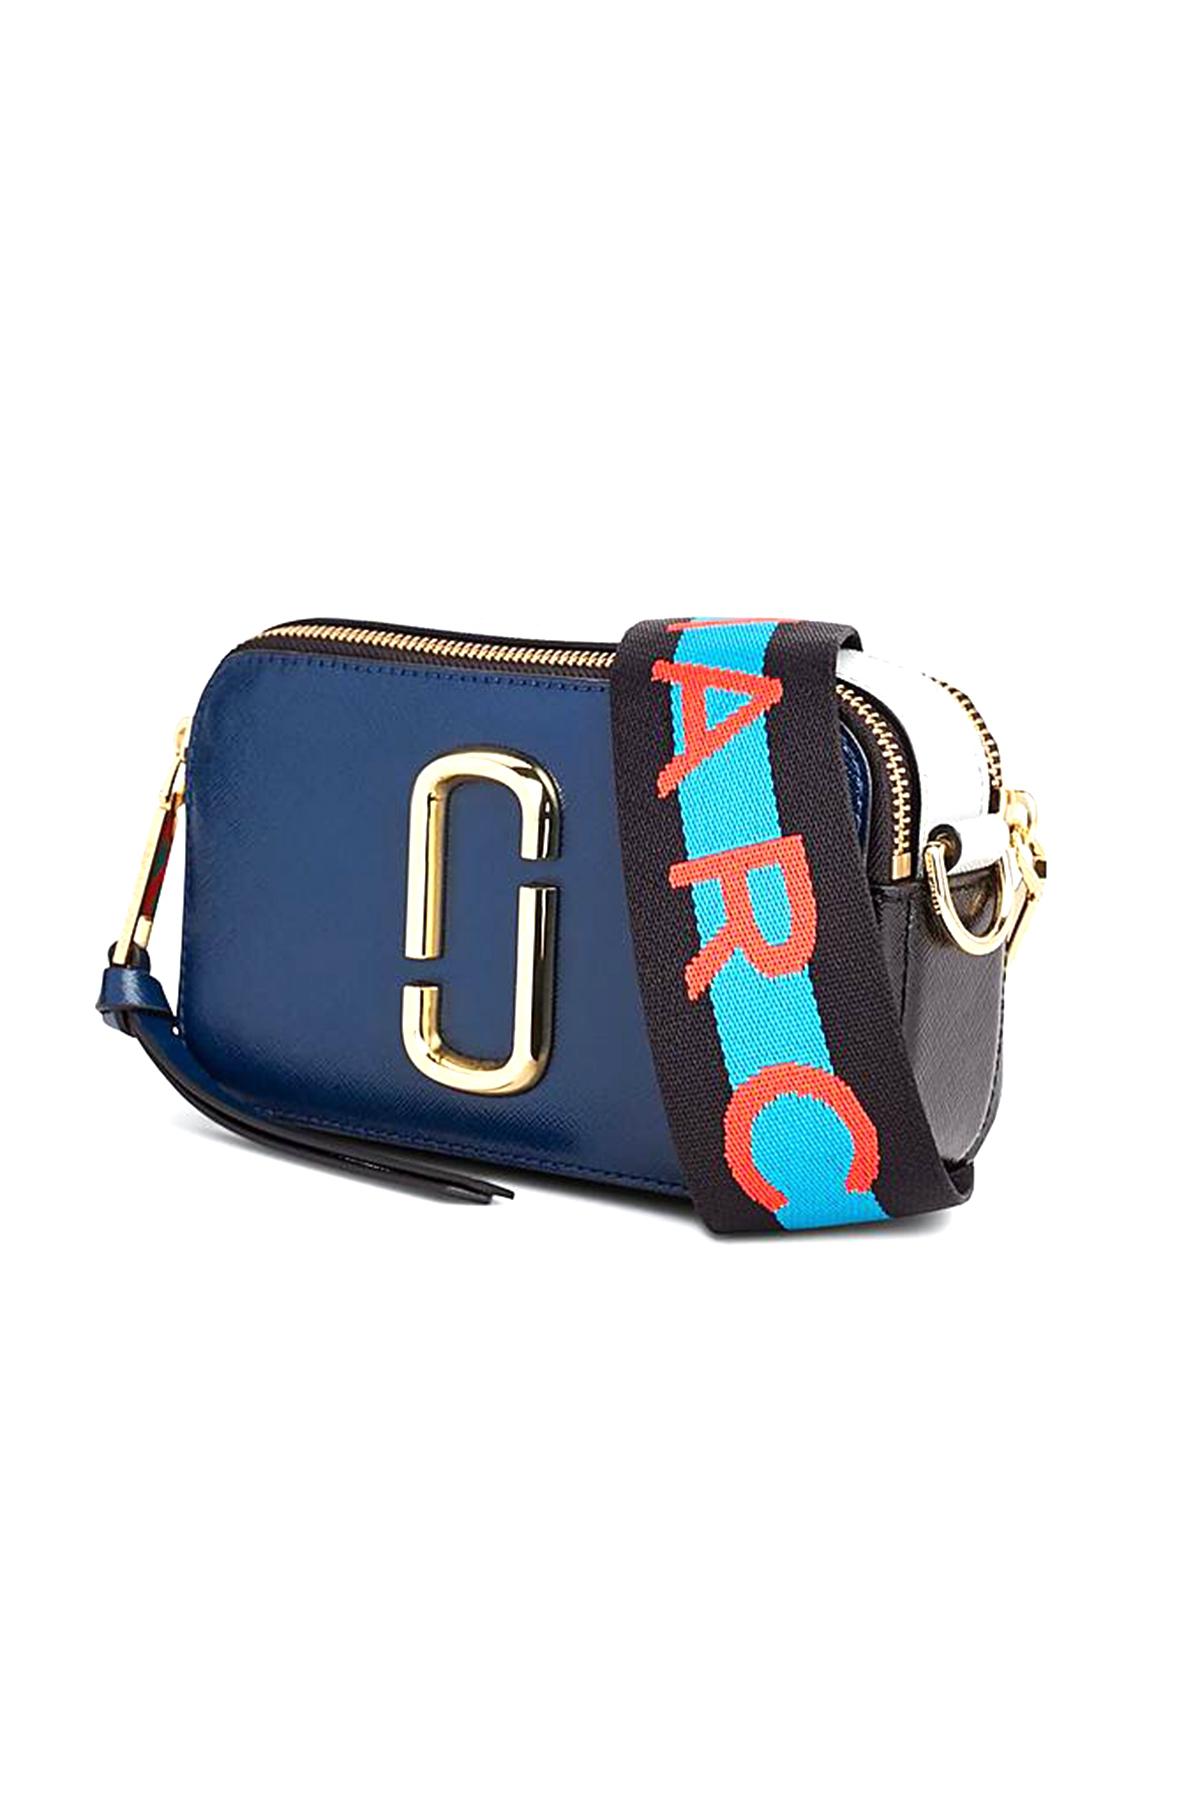 Marc Jacobs Blue and Pink The Snapshot Bag